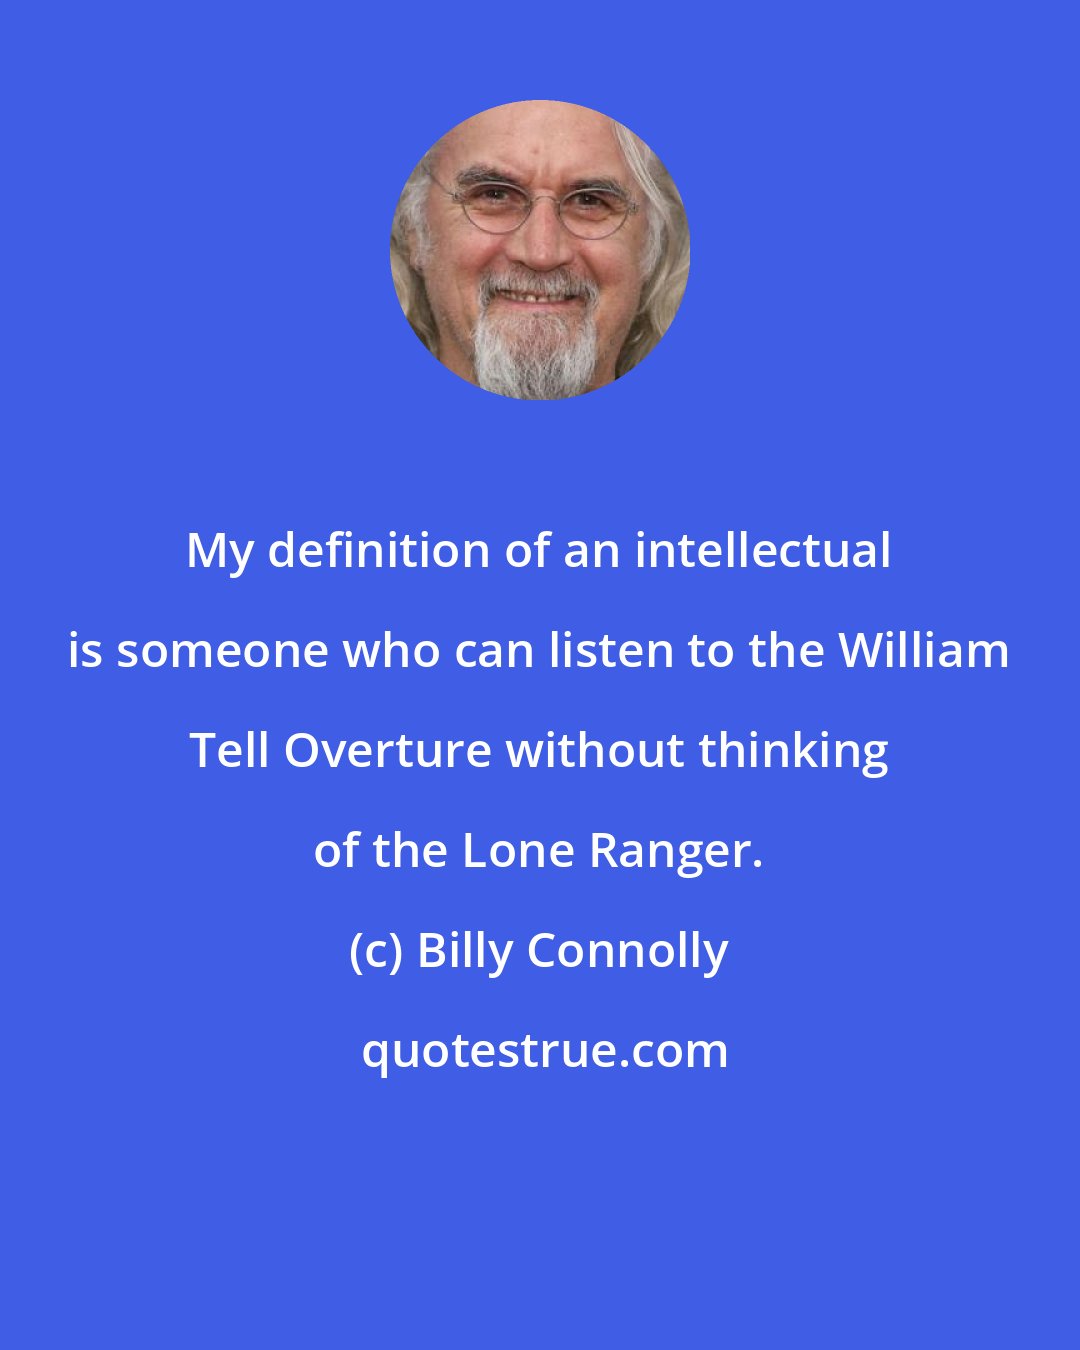 Billy Connolly: My definition of an intellectual is someone who can listen to the William Tell Overture without thinking of the Lone Ranger.